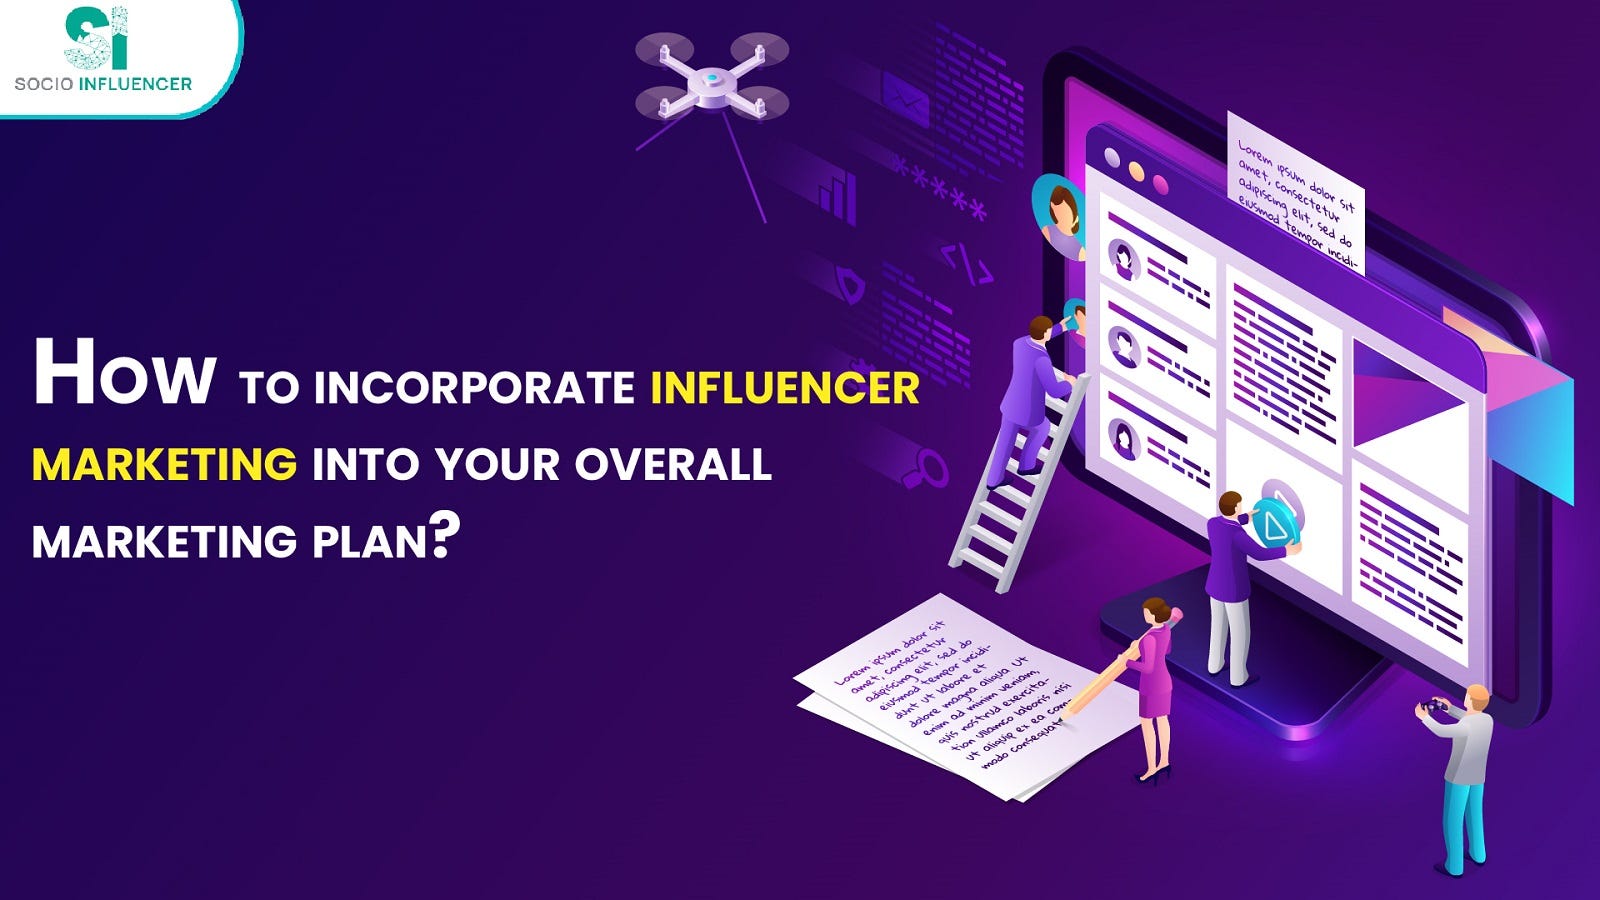 Incorporating Influencer Marketing into Your Marketing Strategy?